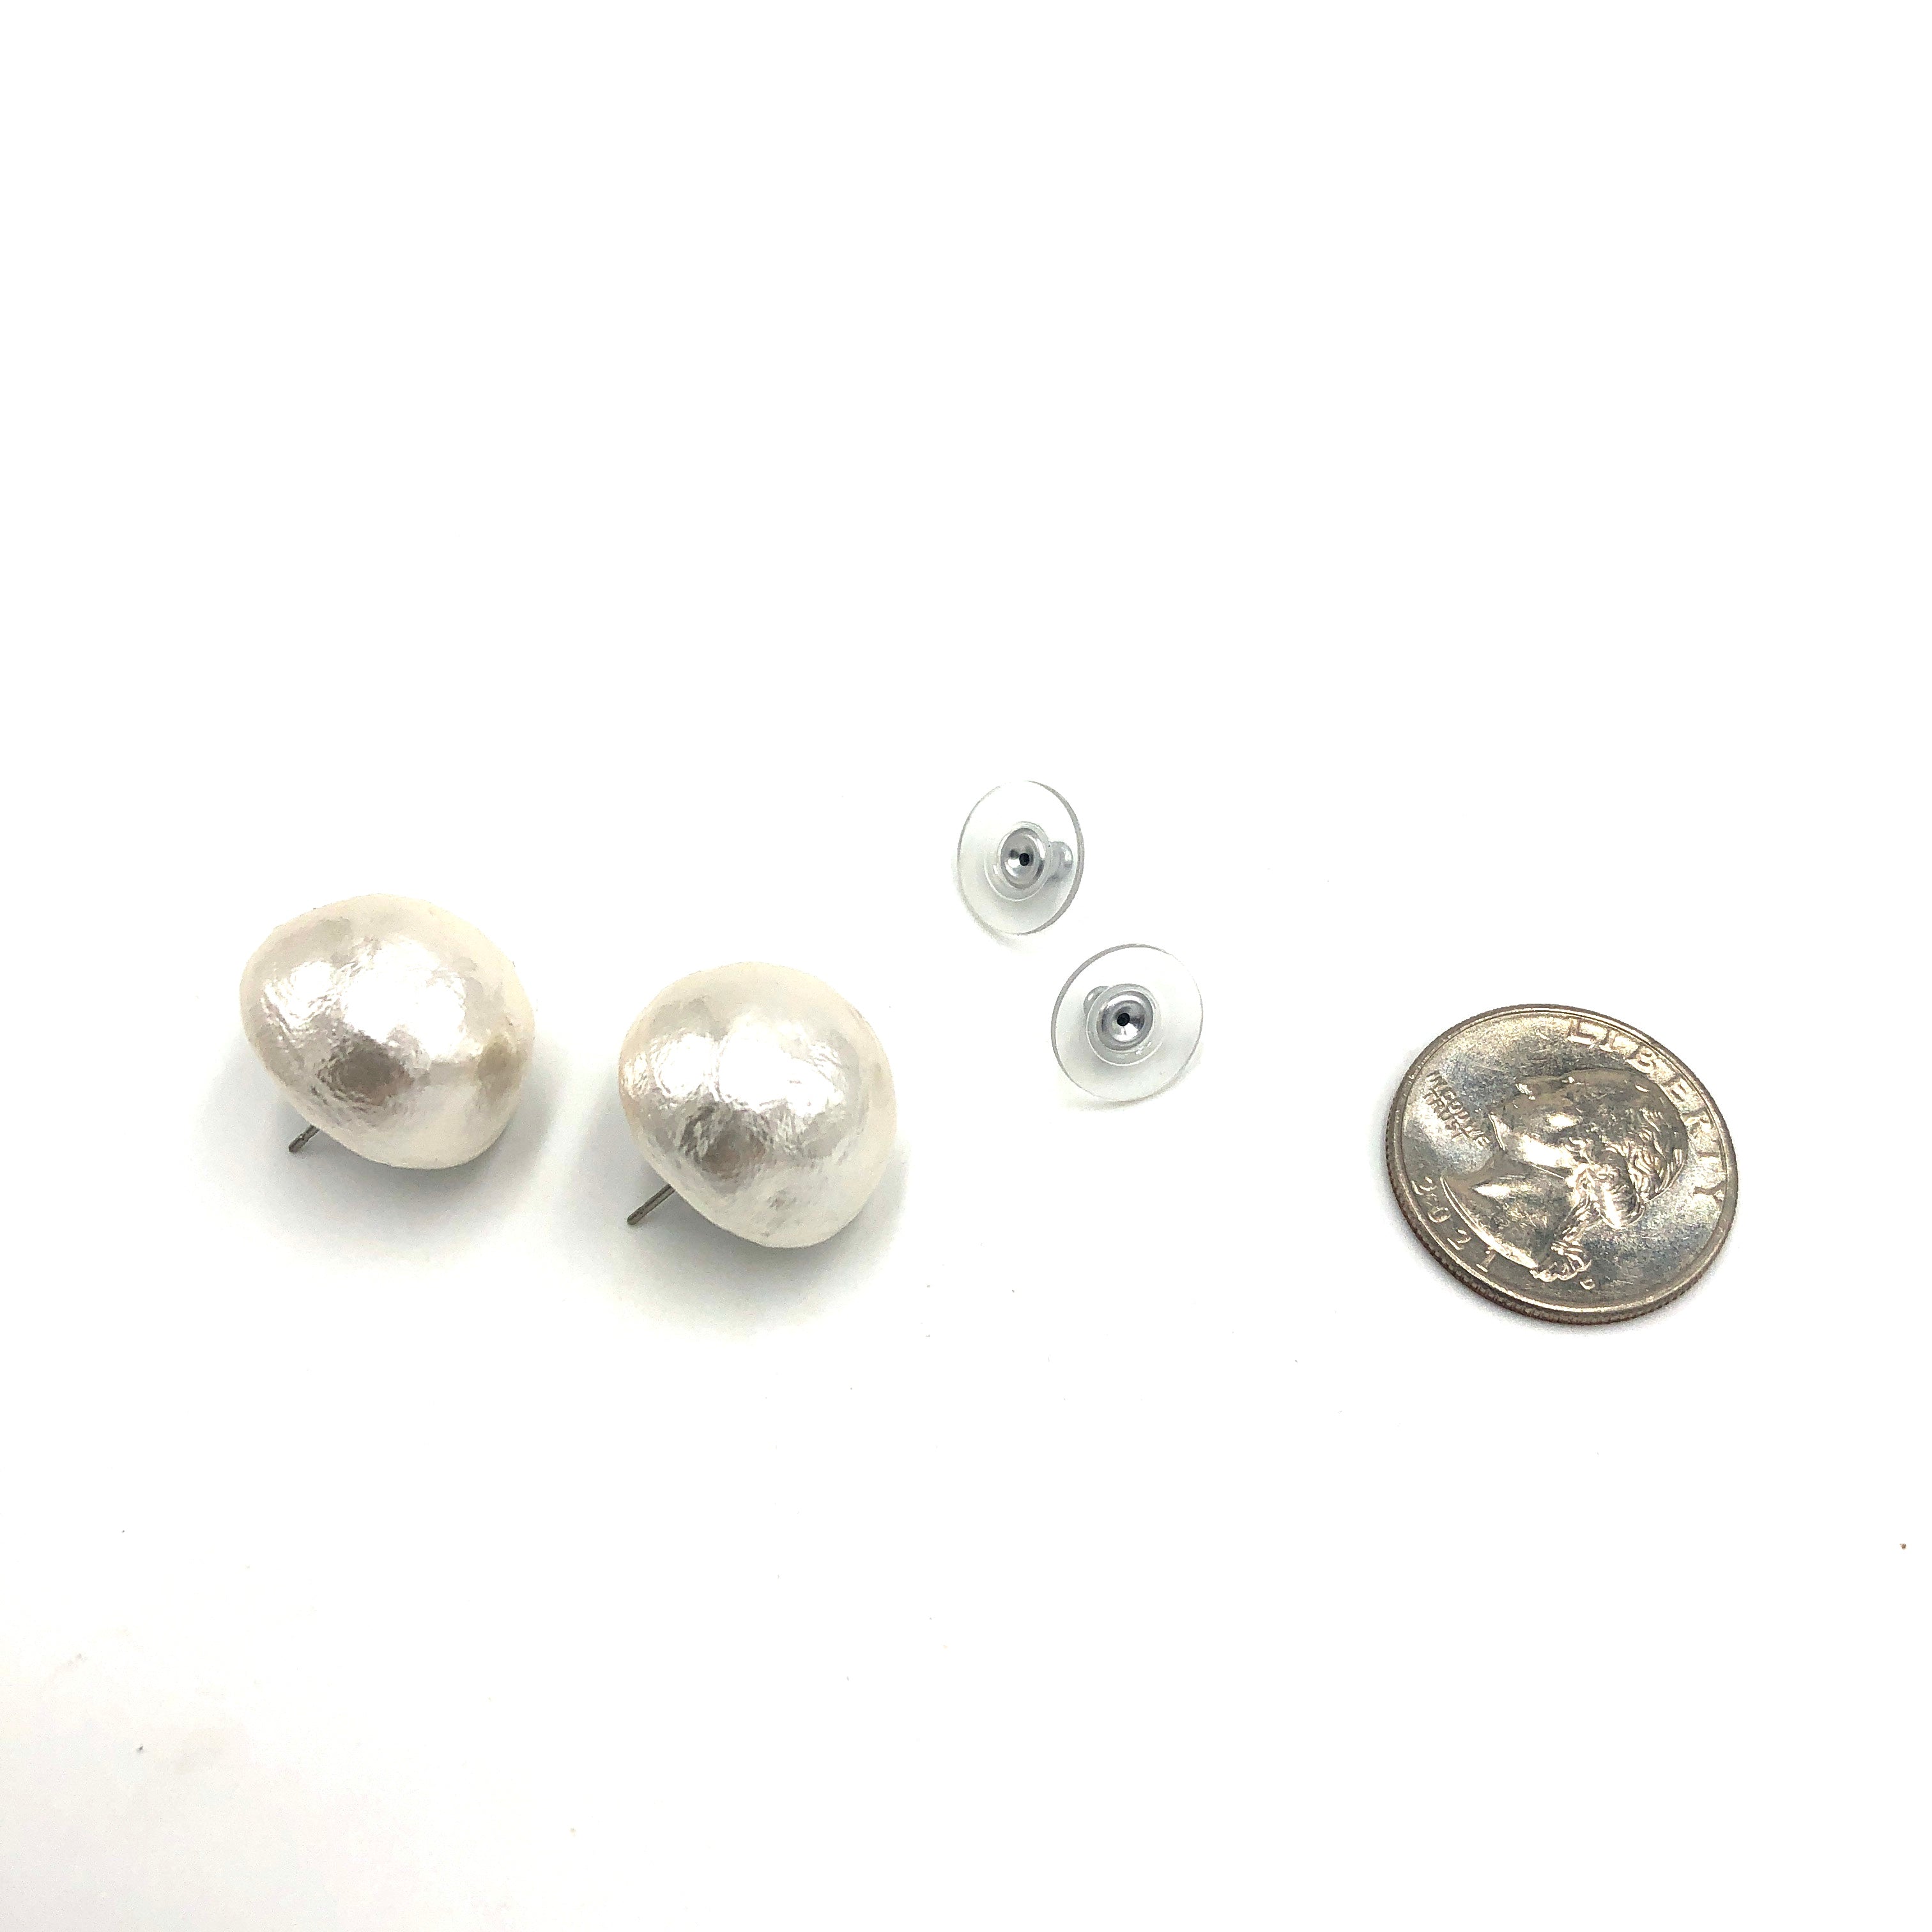 White Cotton Pearl Button Stud Earrings